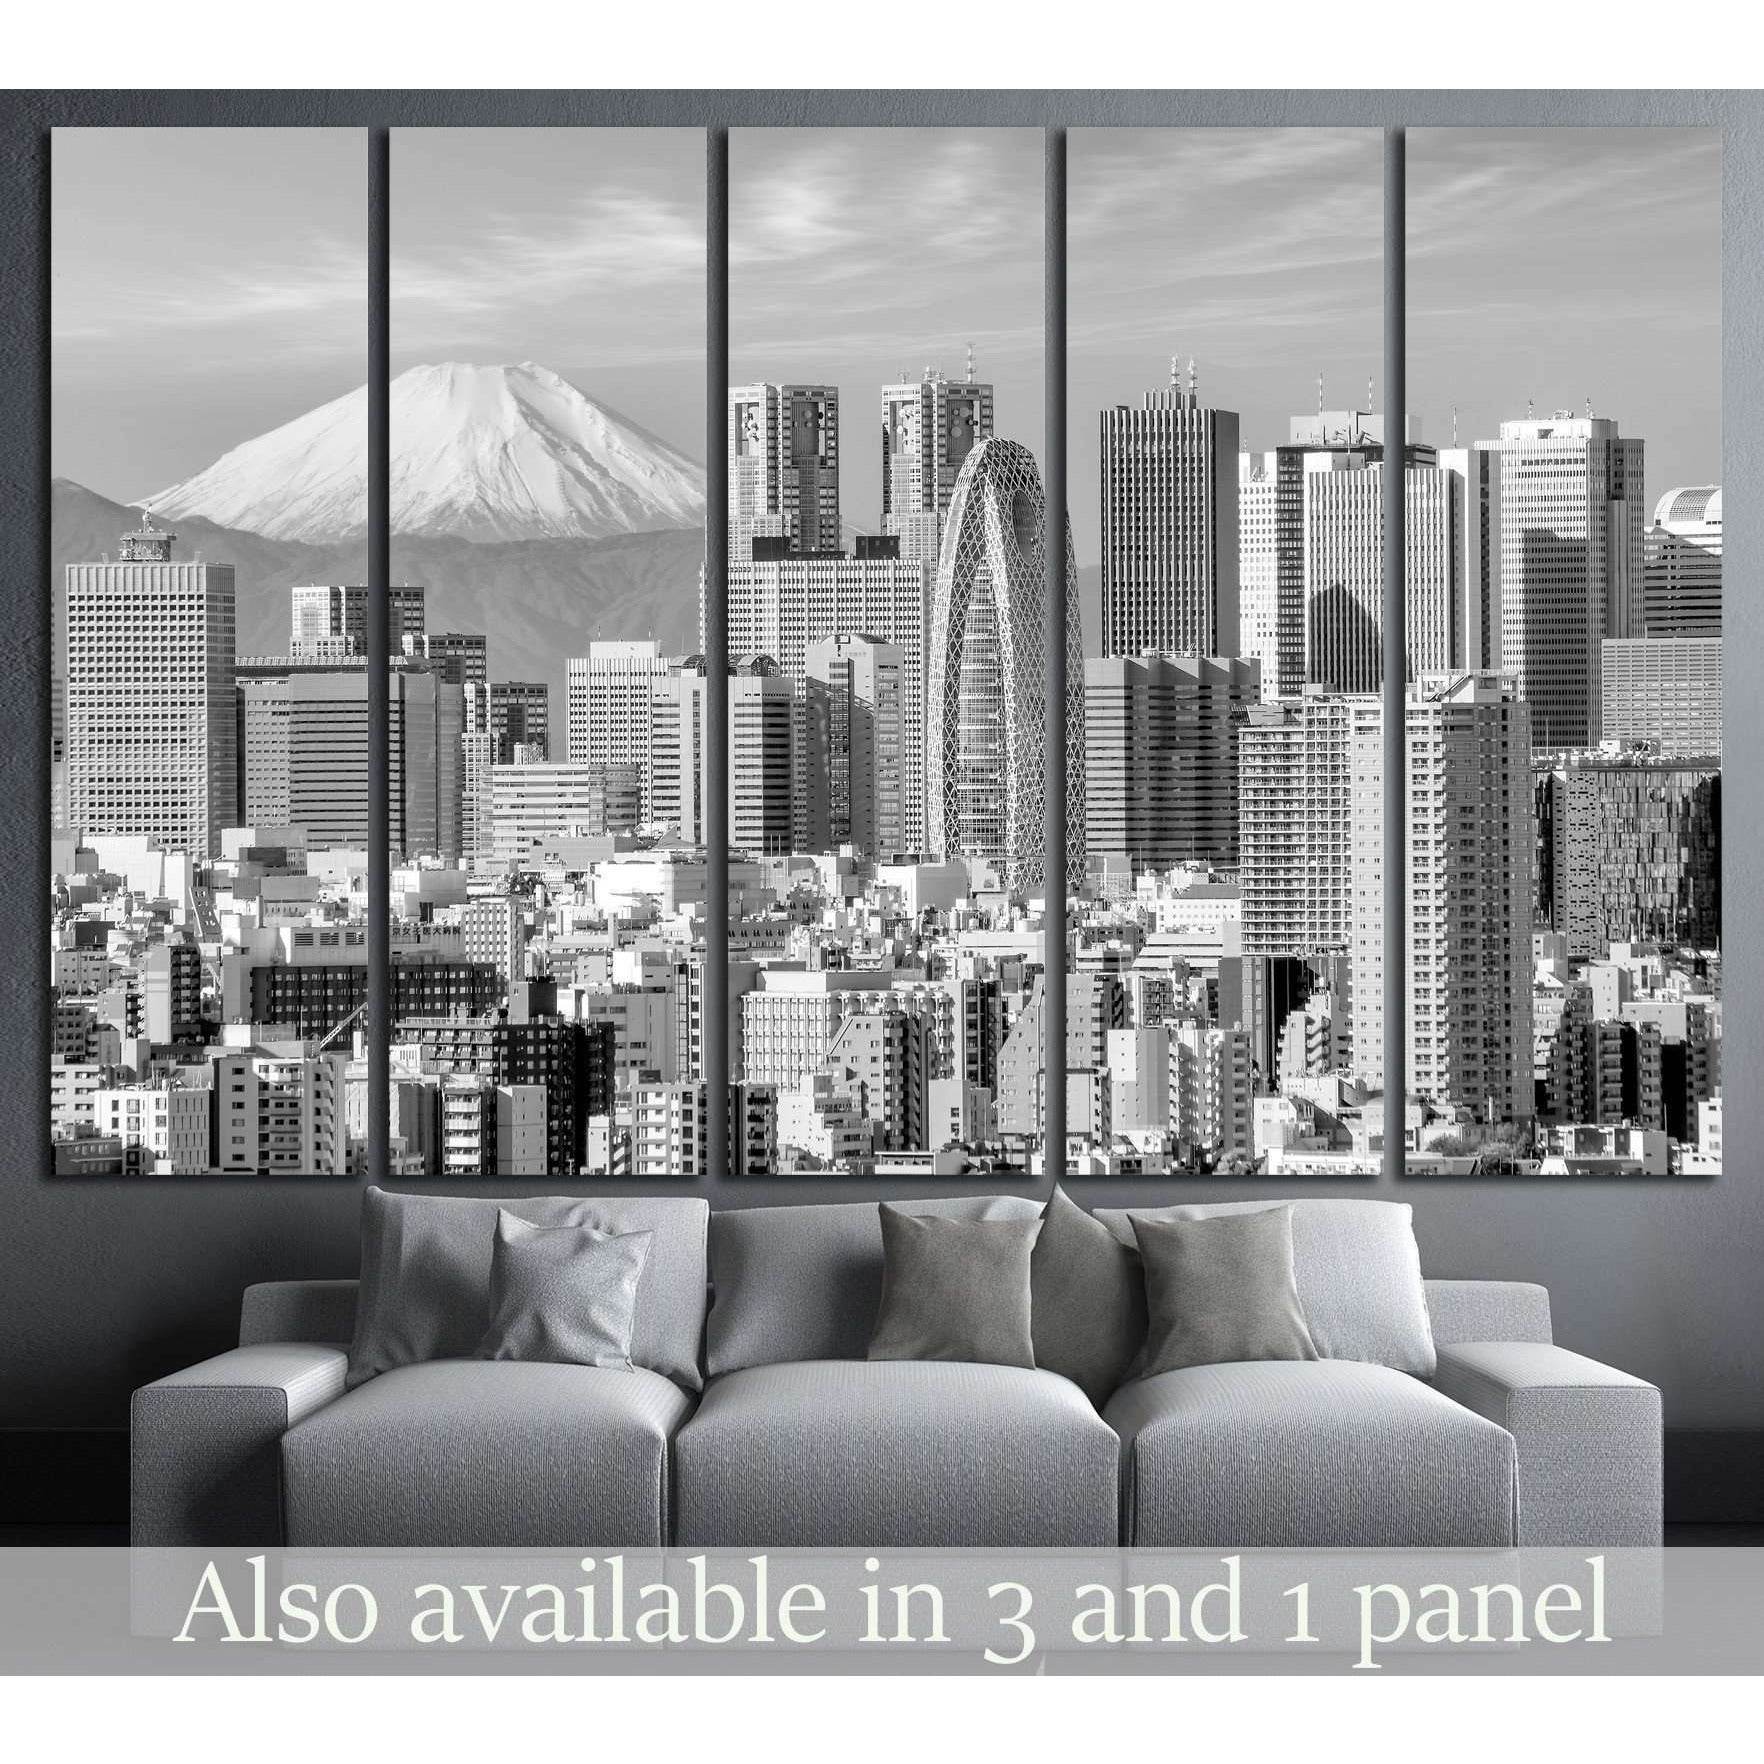 Tokyo skyline and Mountain fuji in Japan №1280 Ready to Hang Canvas Print